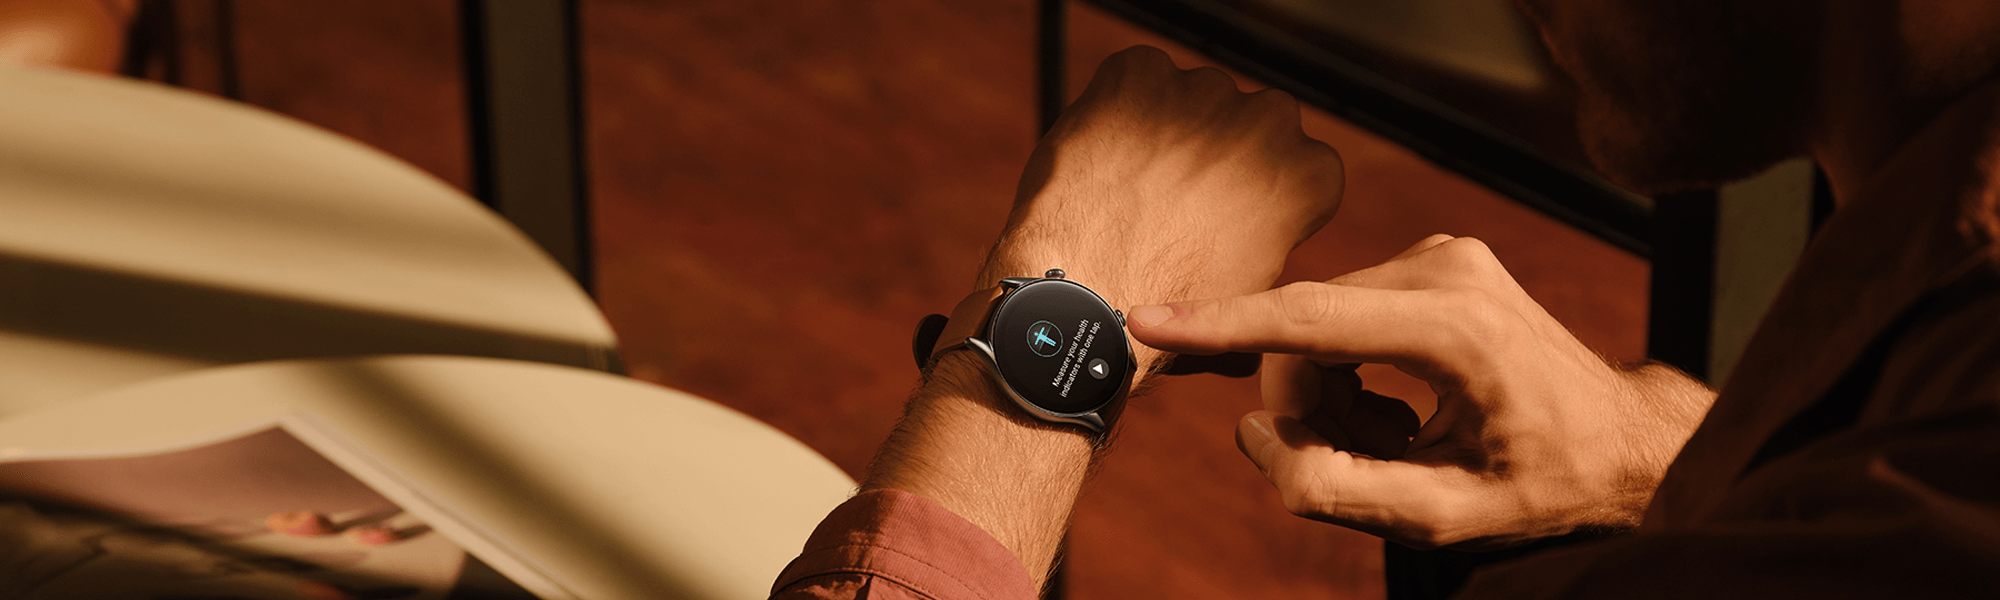 Huawei Band 8 Malaysia release - new Orange Nylon Strap model, priced at  RM229